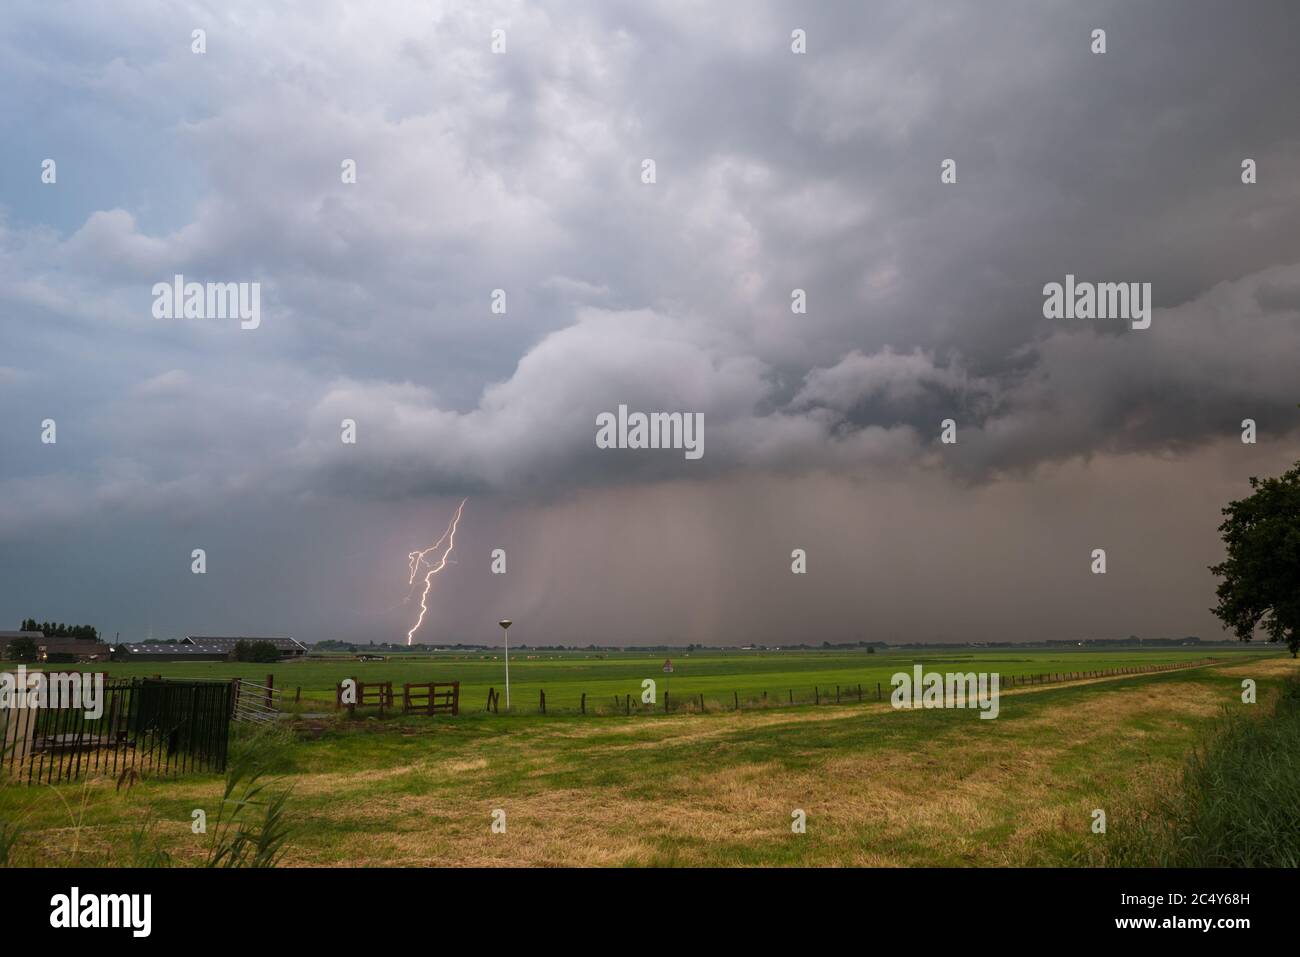 Severe thunderstorm approaching over a field. Lightning bolt hits the earth. Stock Photo